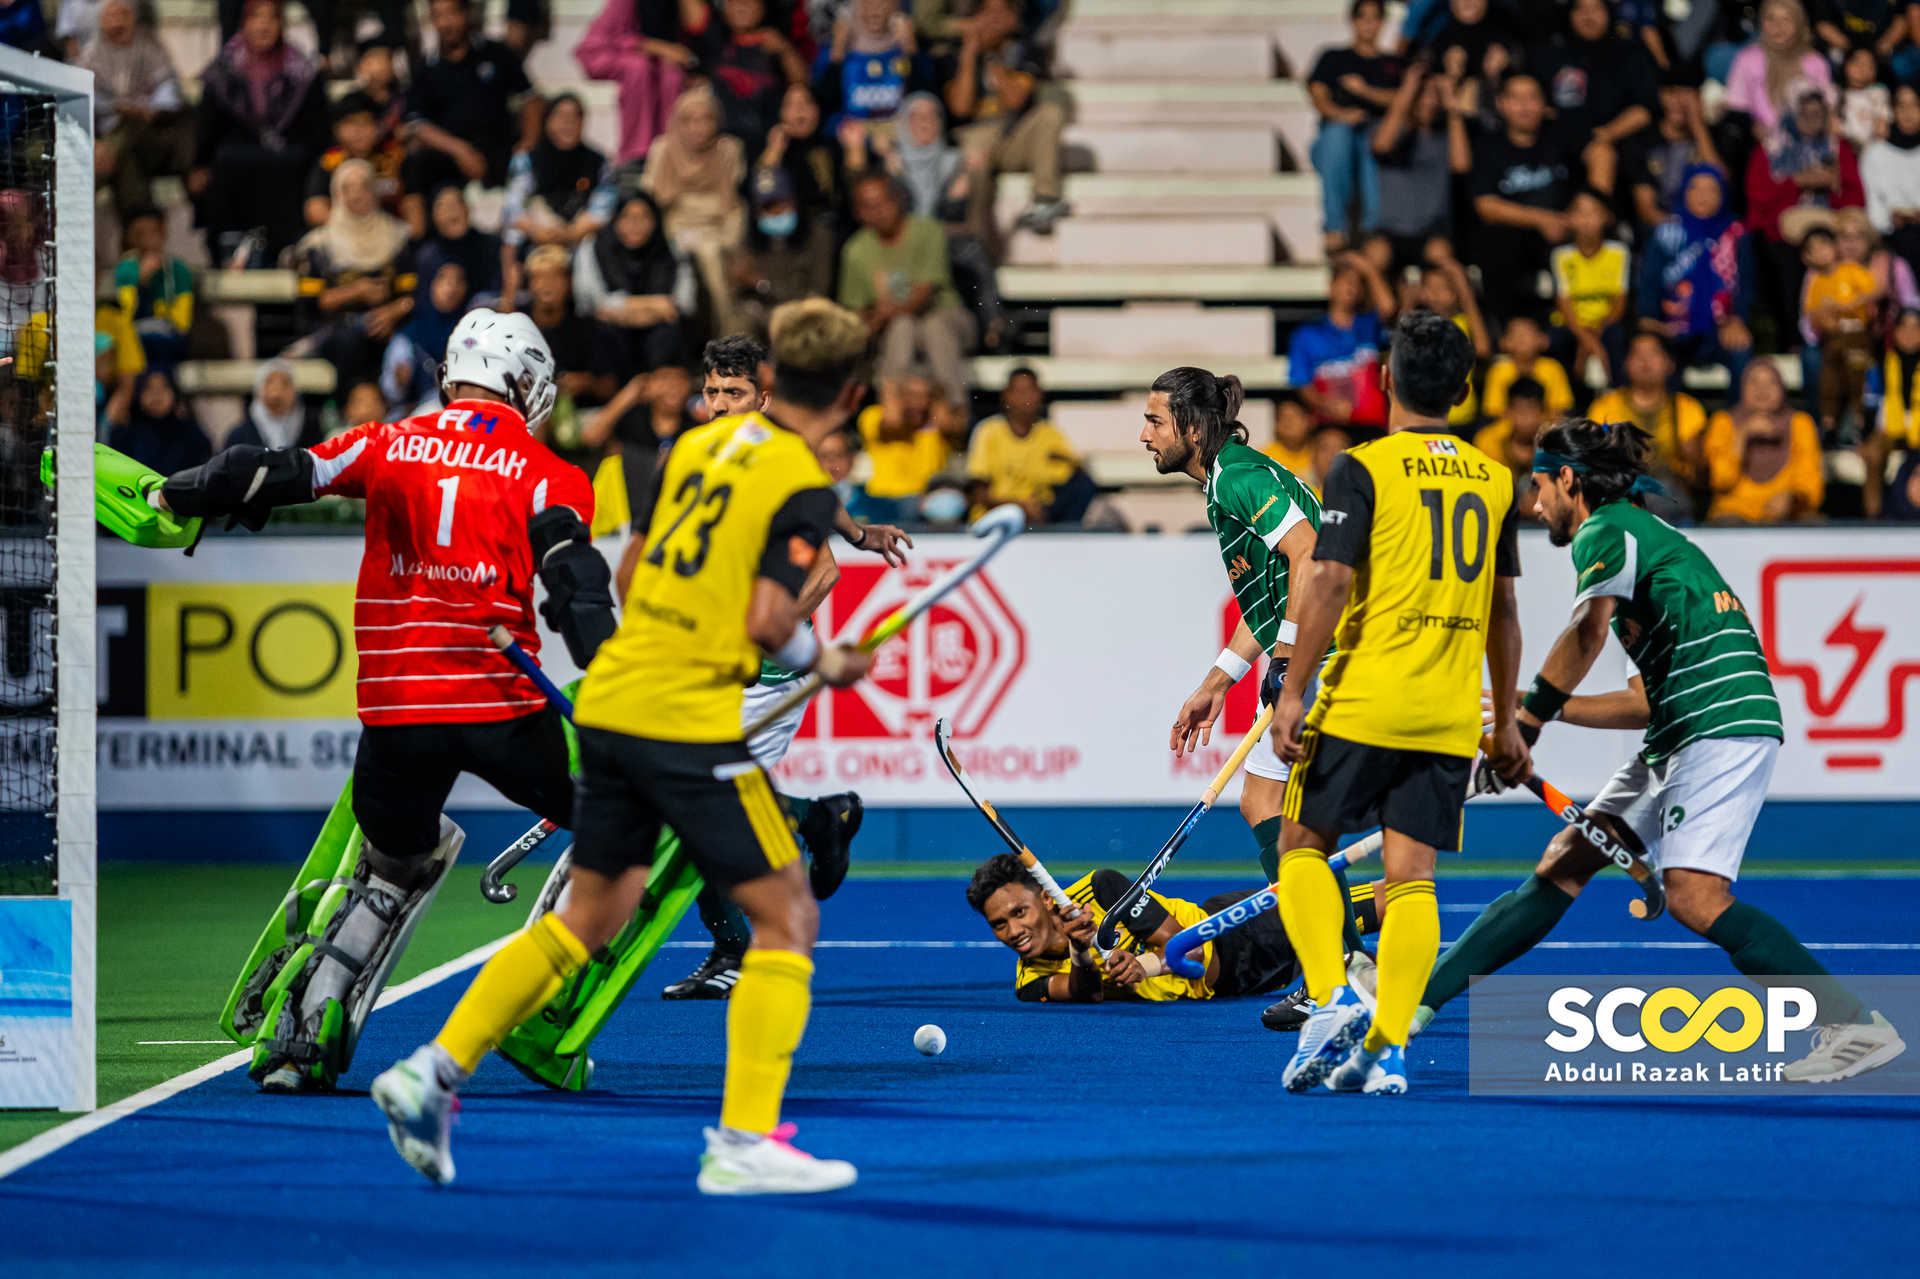 Photo of the day: Speedy Tigers put claws out at Sultan Azlan Shah Cup